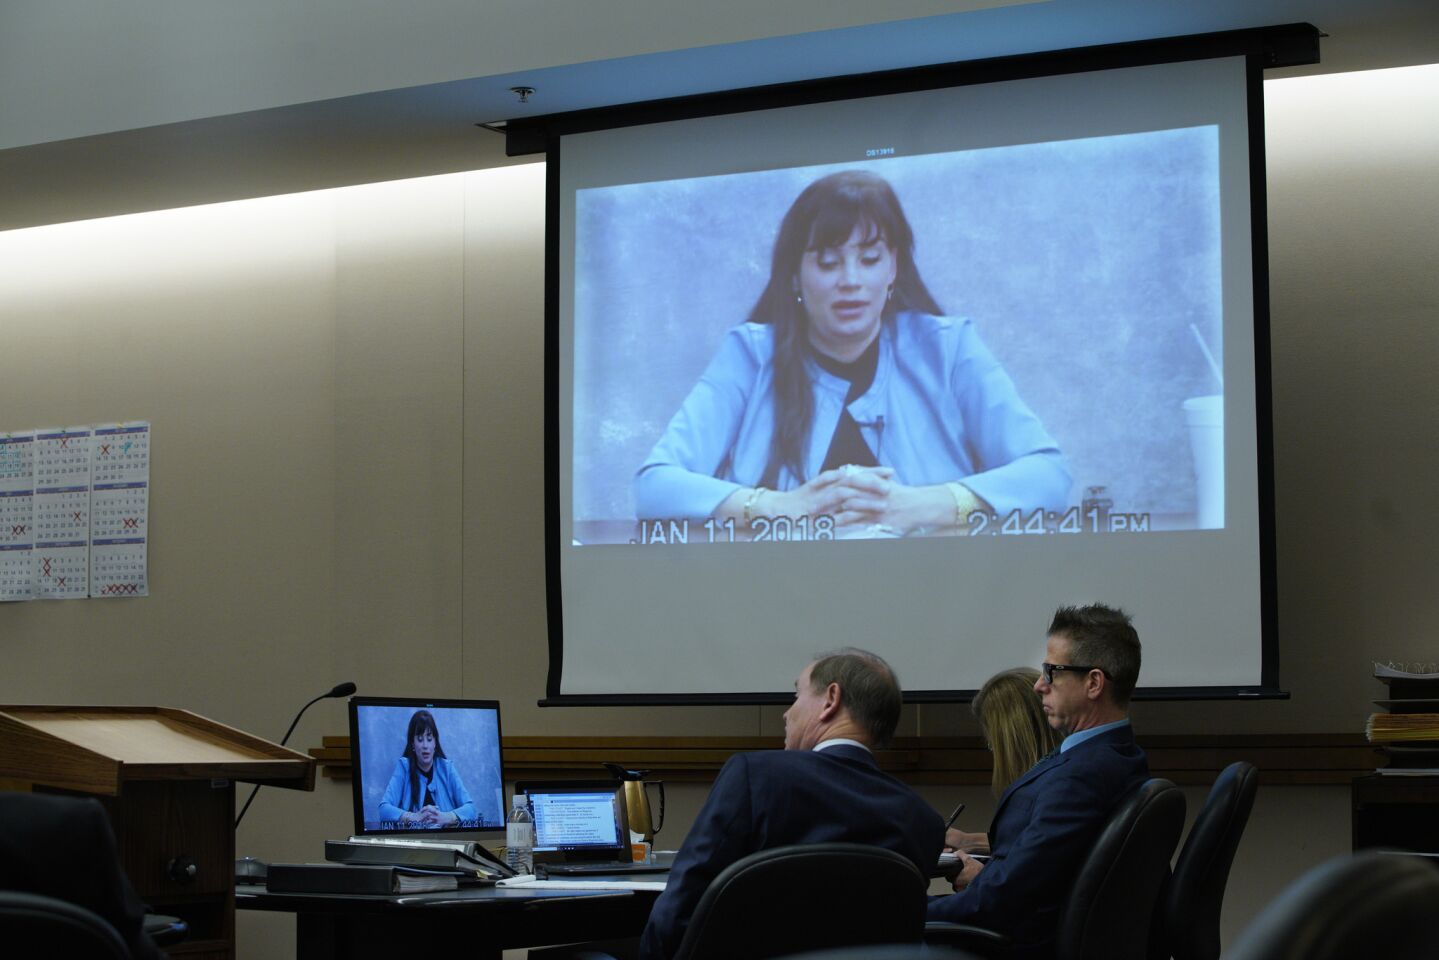 Adam Shacknai and his attorneys, Dan Webb (left) and Krista M. Enns watched the video deposition of Dina Shacknai taken on January 11, 2018 as it is played in court during the civil trial for the wrongful death of Rebecca Zahau in San Diego Superior Court.